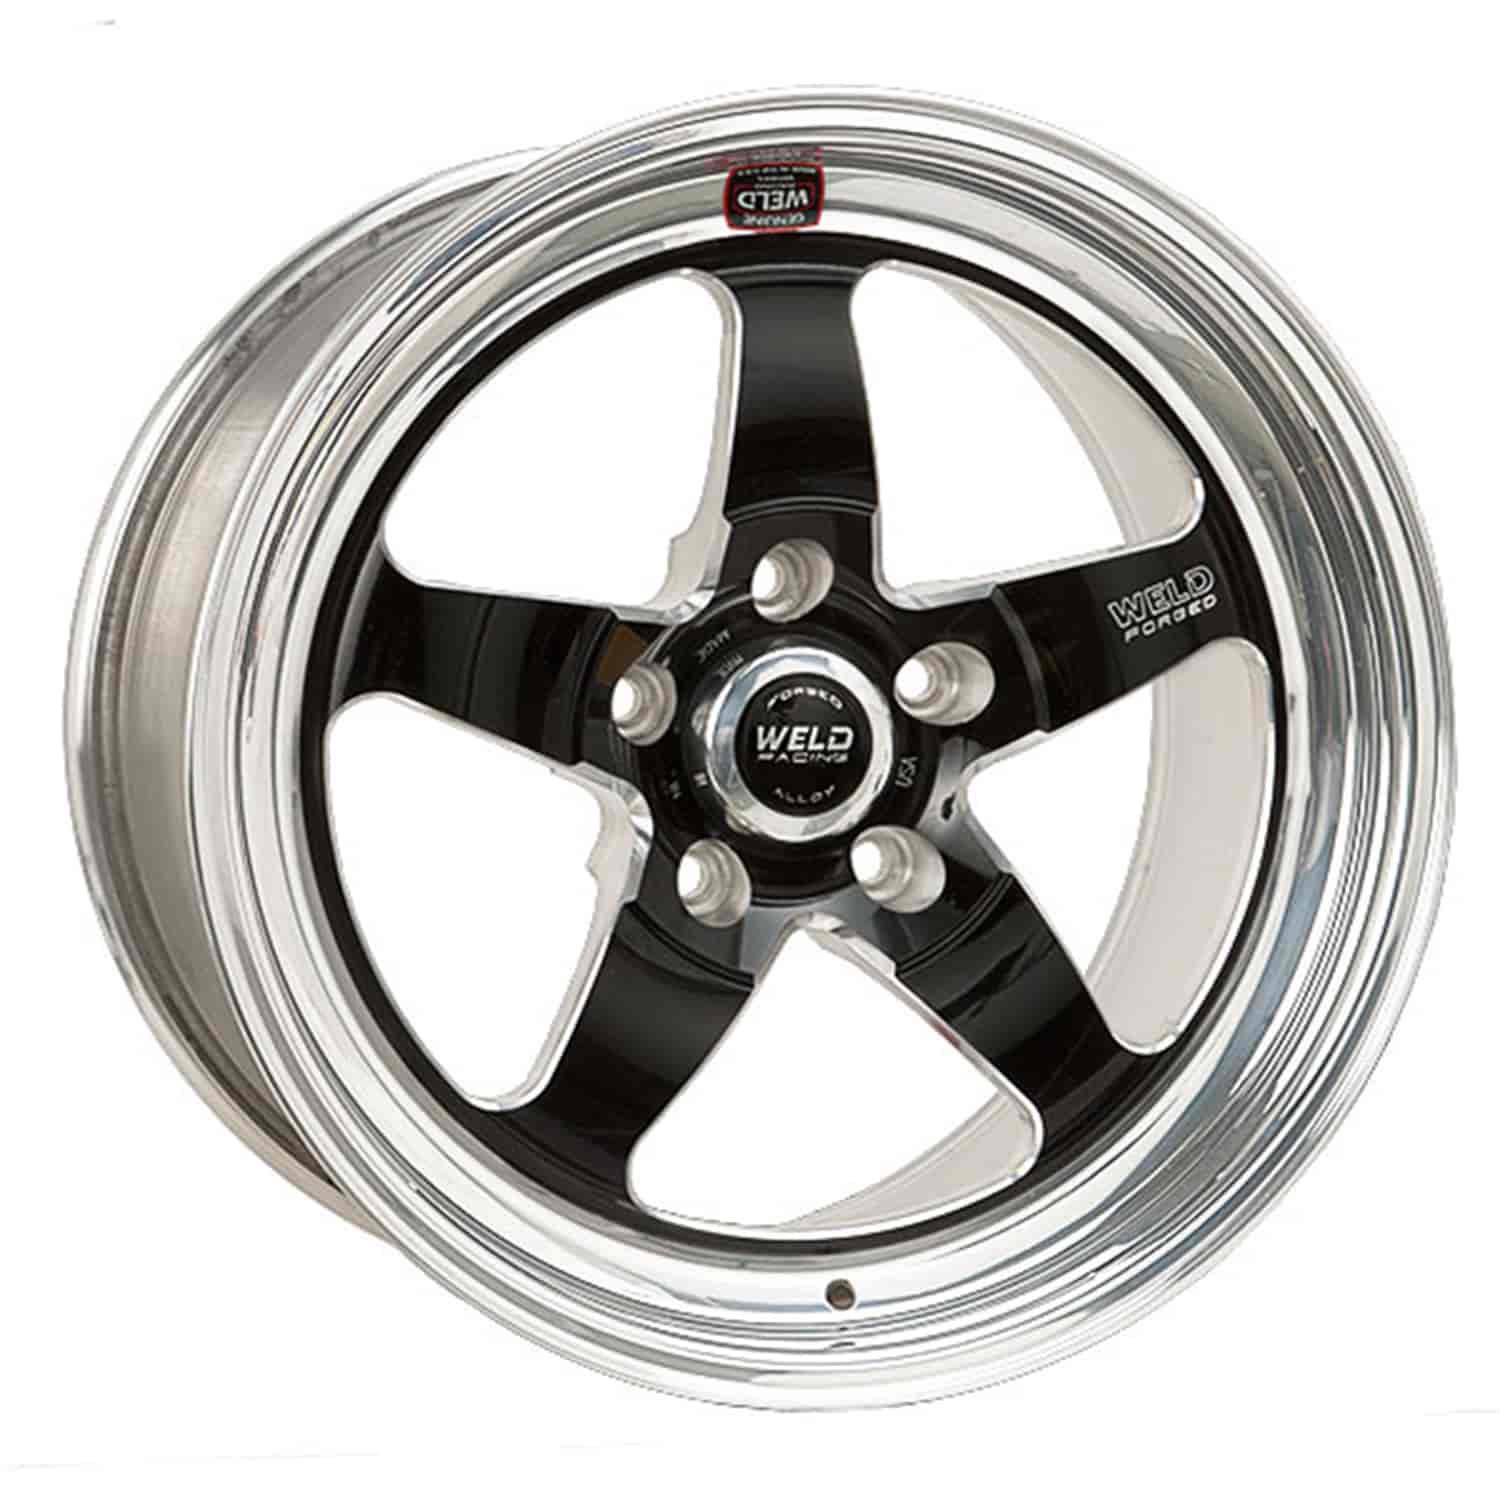 RT-S Series Wheel Size: 15" x 7" Bolt Circle: 5 x 4-3/4" Back Space: 3-1/2"